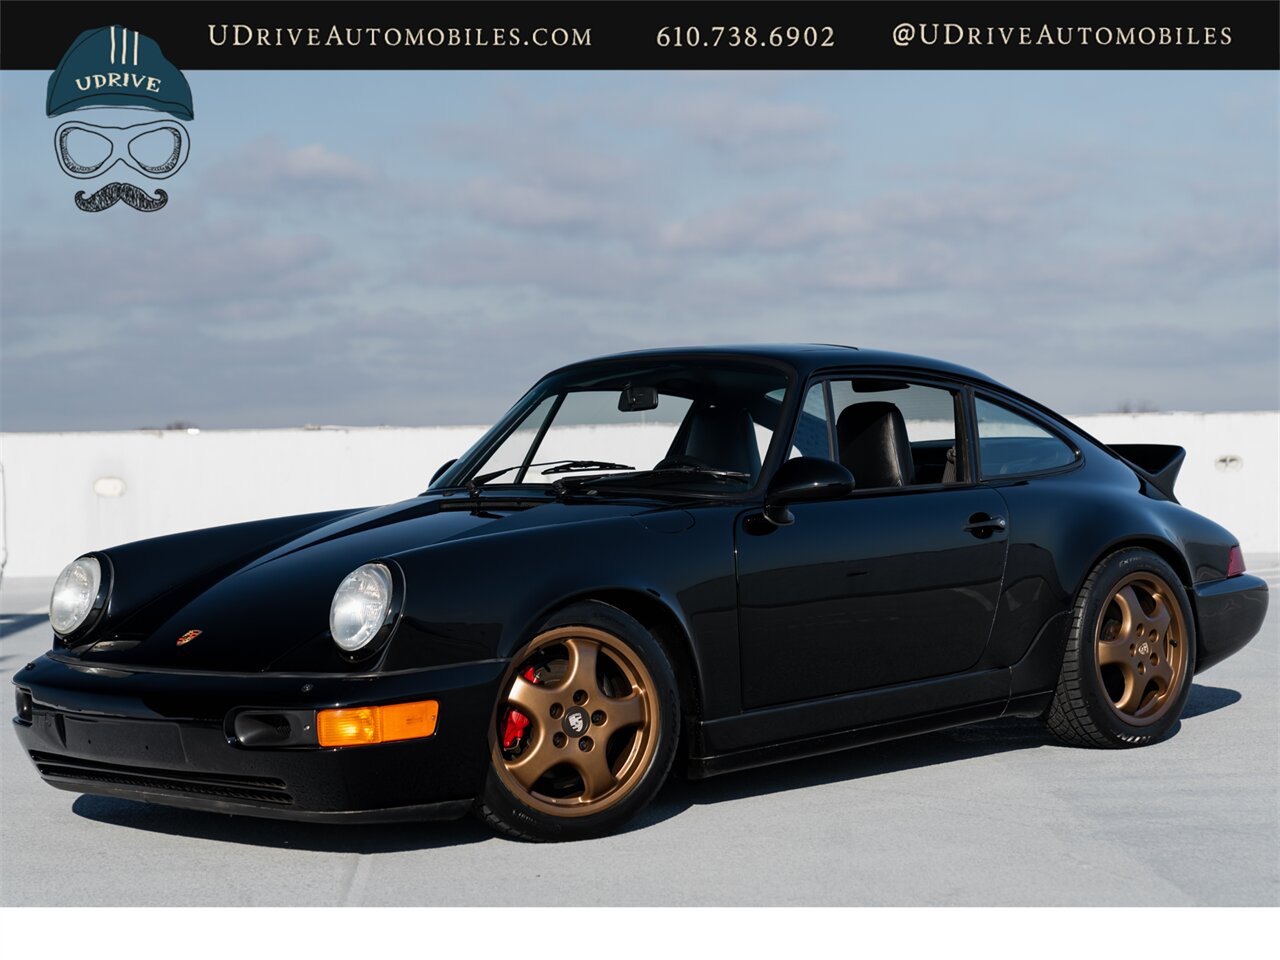 1989 Porsche 911 C4  964 Carrera 4 C4 5 Speed Manual $33k in Recent Service History - Photo 1 - West Chester, PA 19382